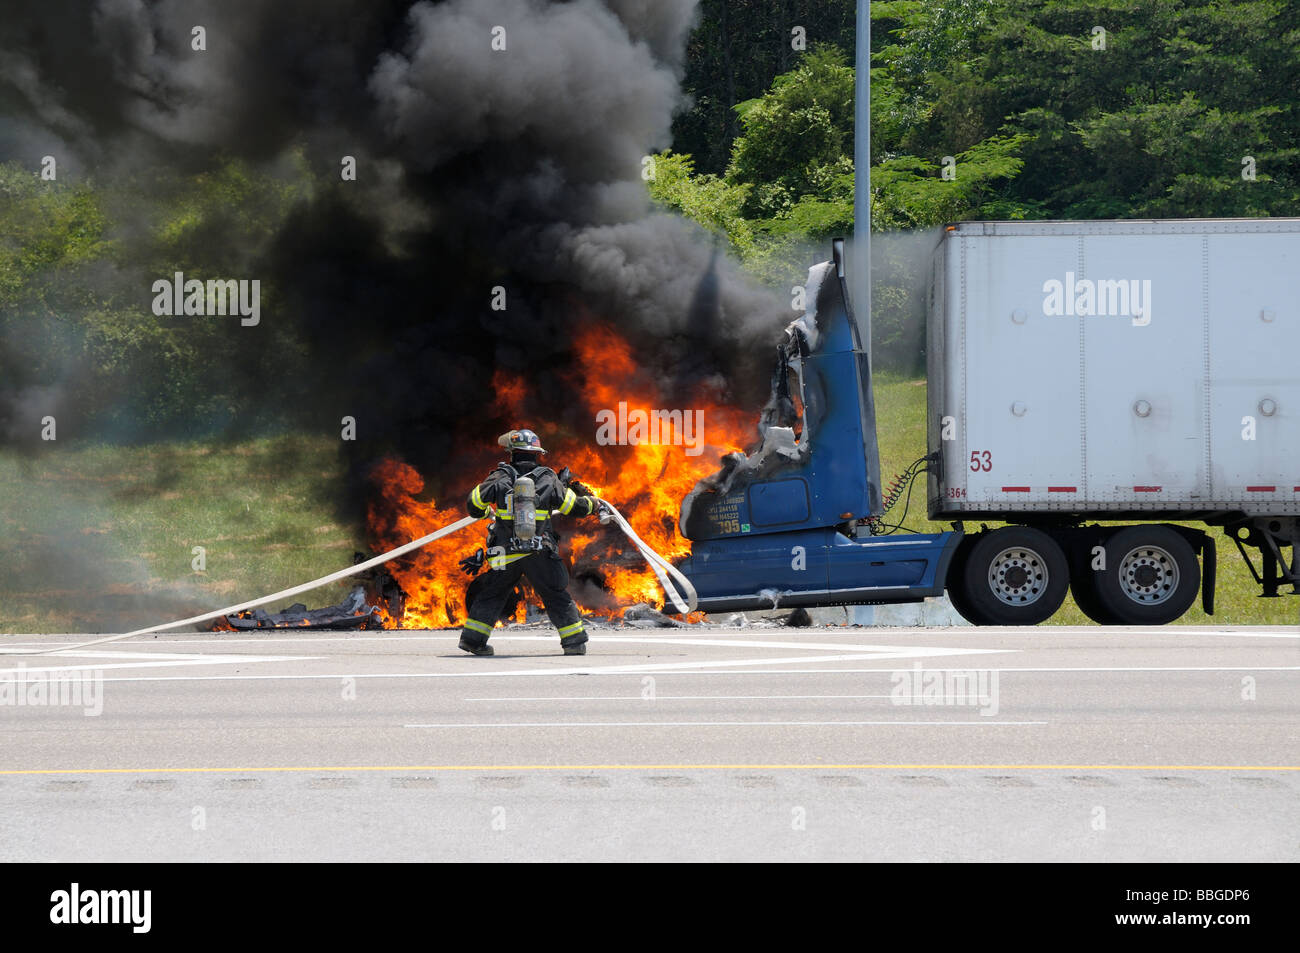 A semi-trailer truck fire consumes the cab of the truck on I-640 in Knoxville, Tennessee, USA.  Photo by Darrell Young. Stock Photo